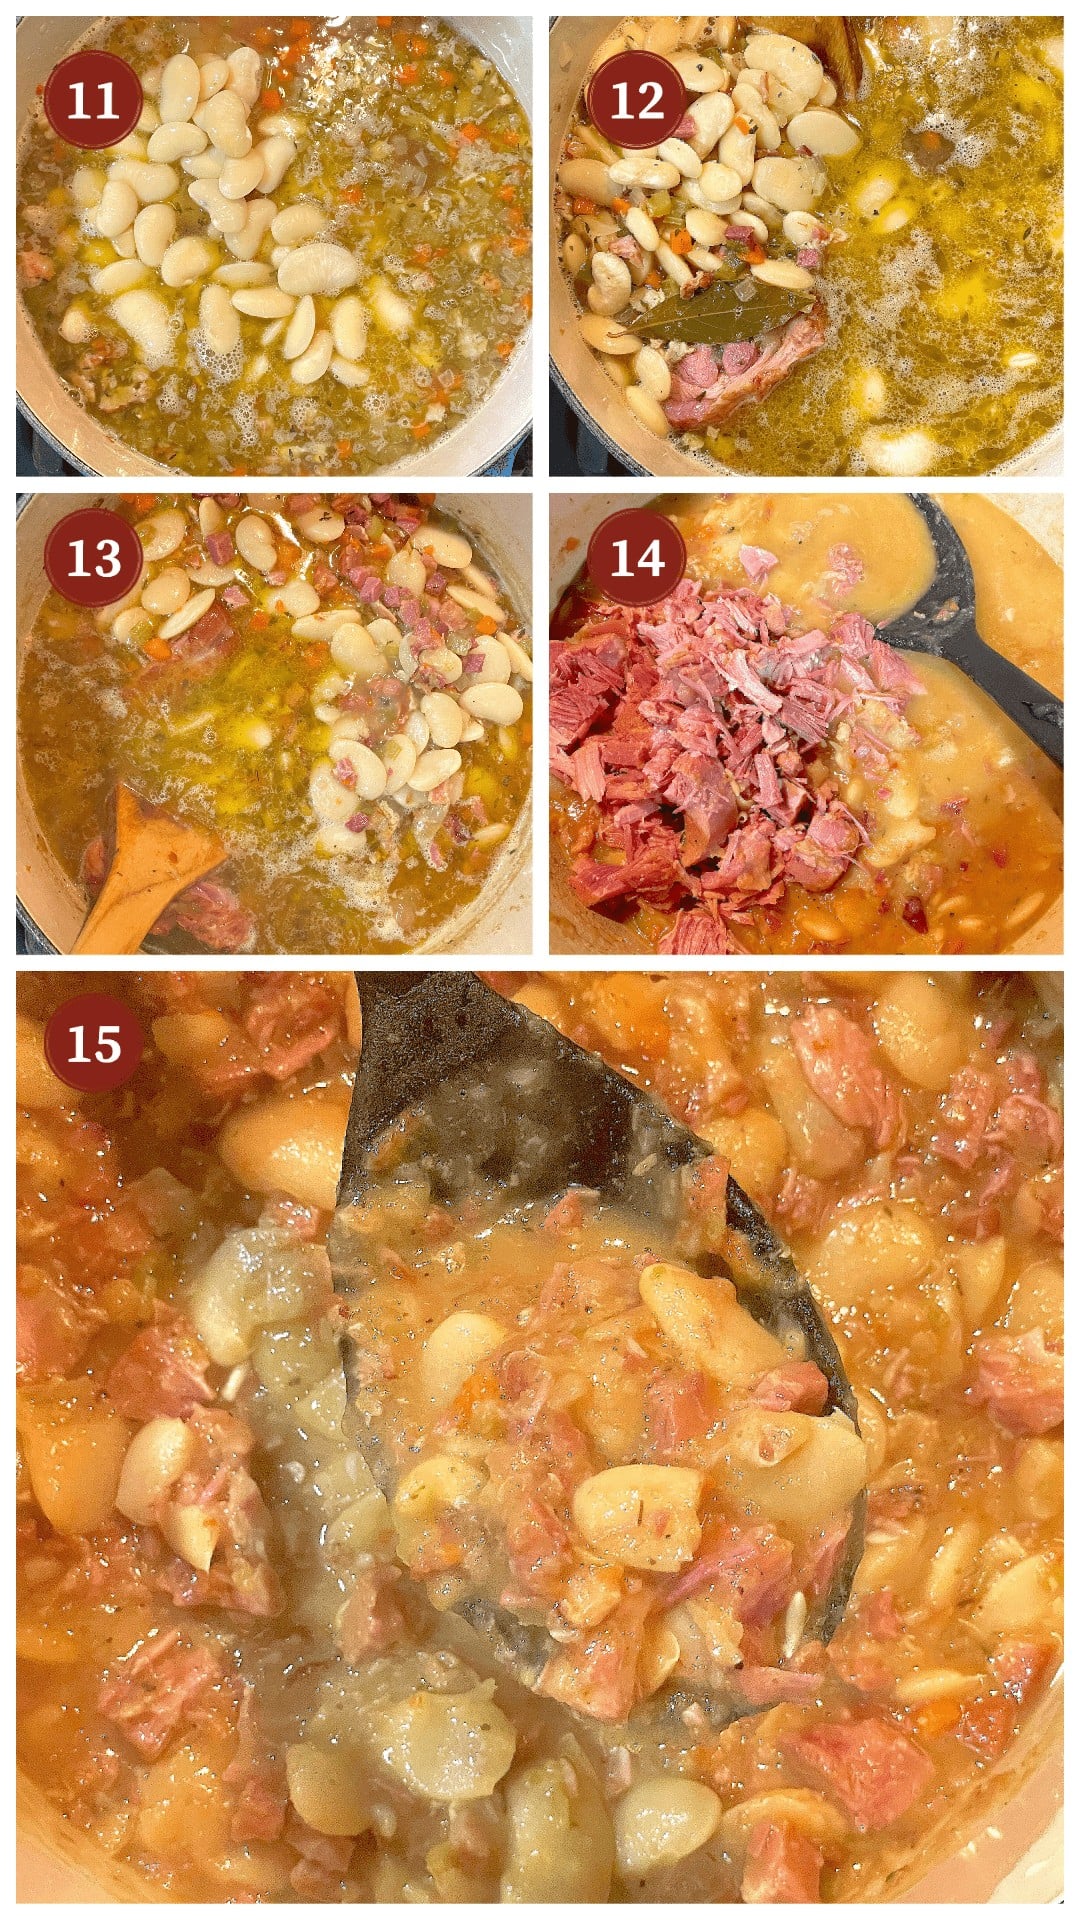 A collage of images showing how to prepare Southern lima beans, steps 11-15.